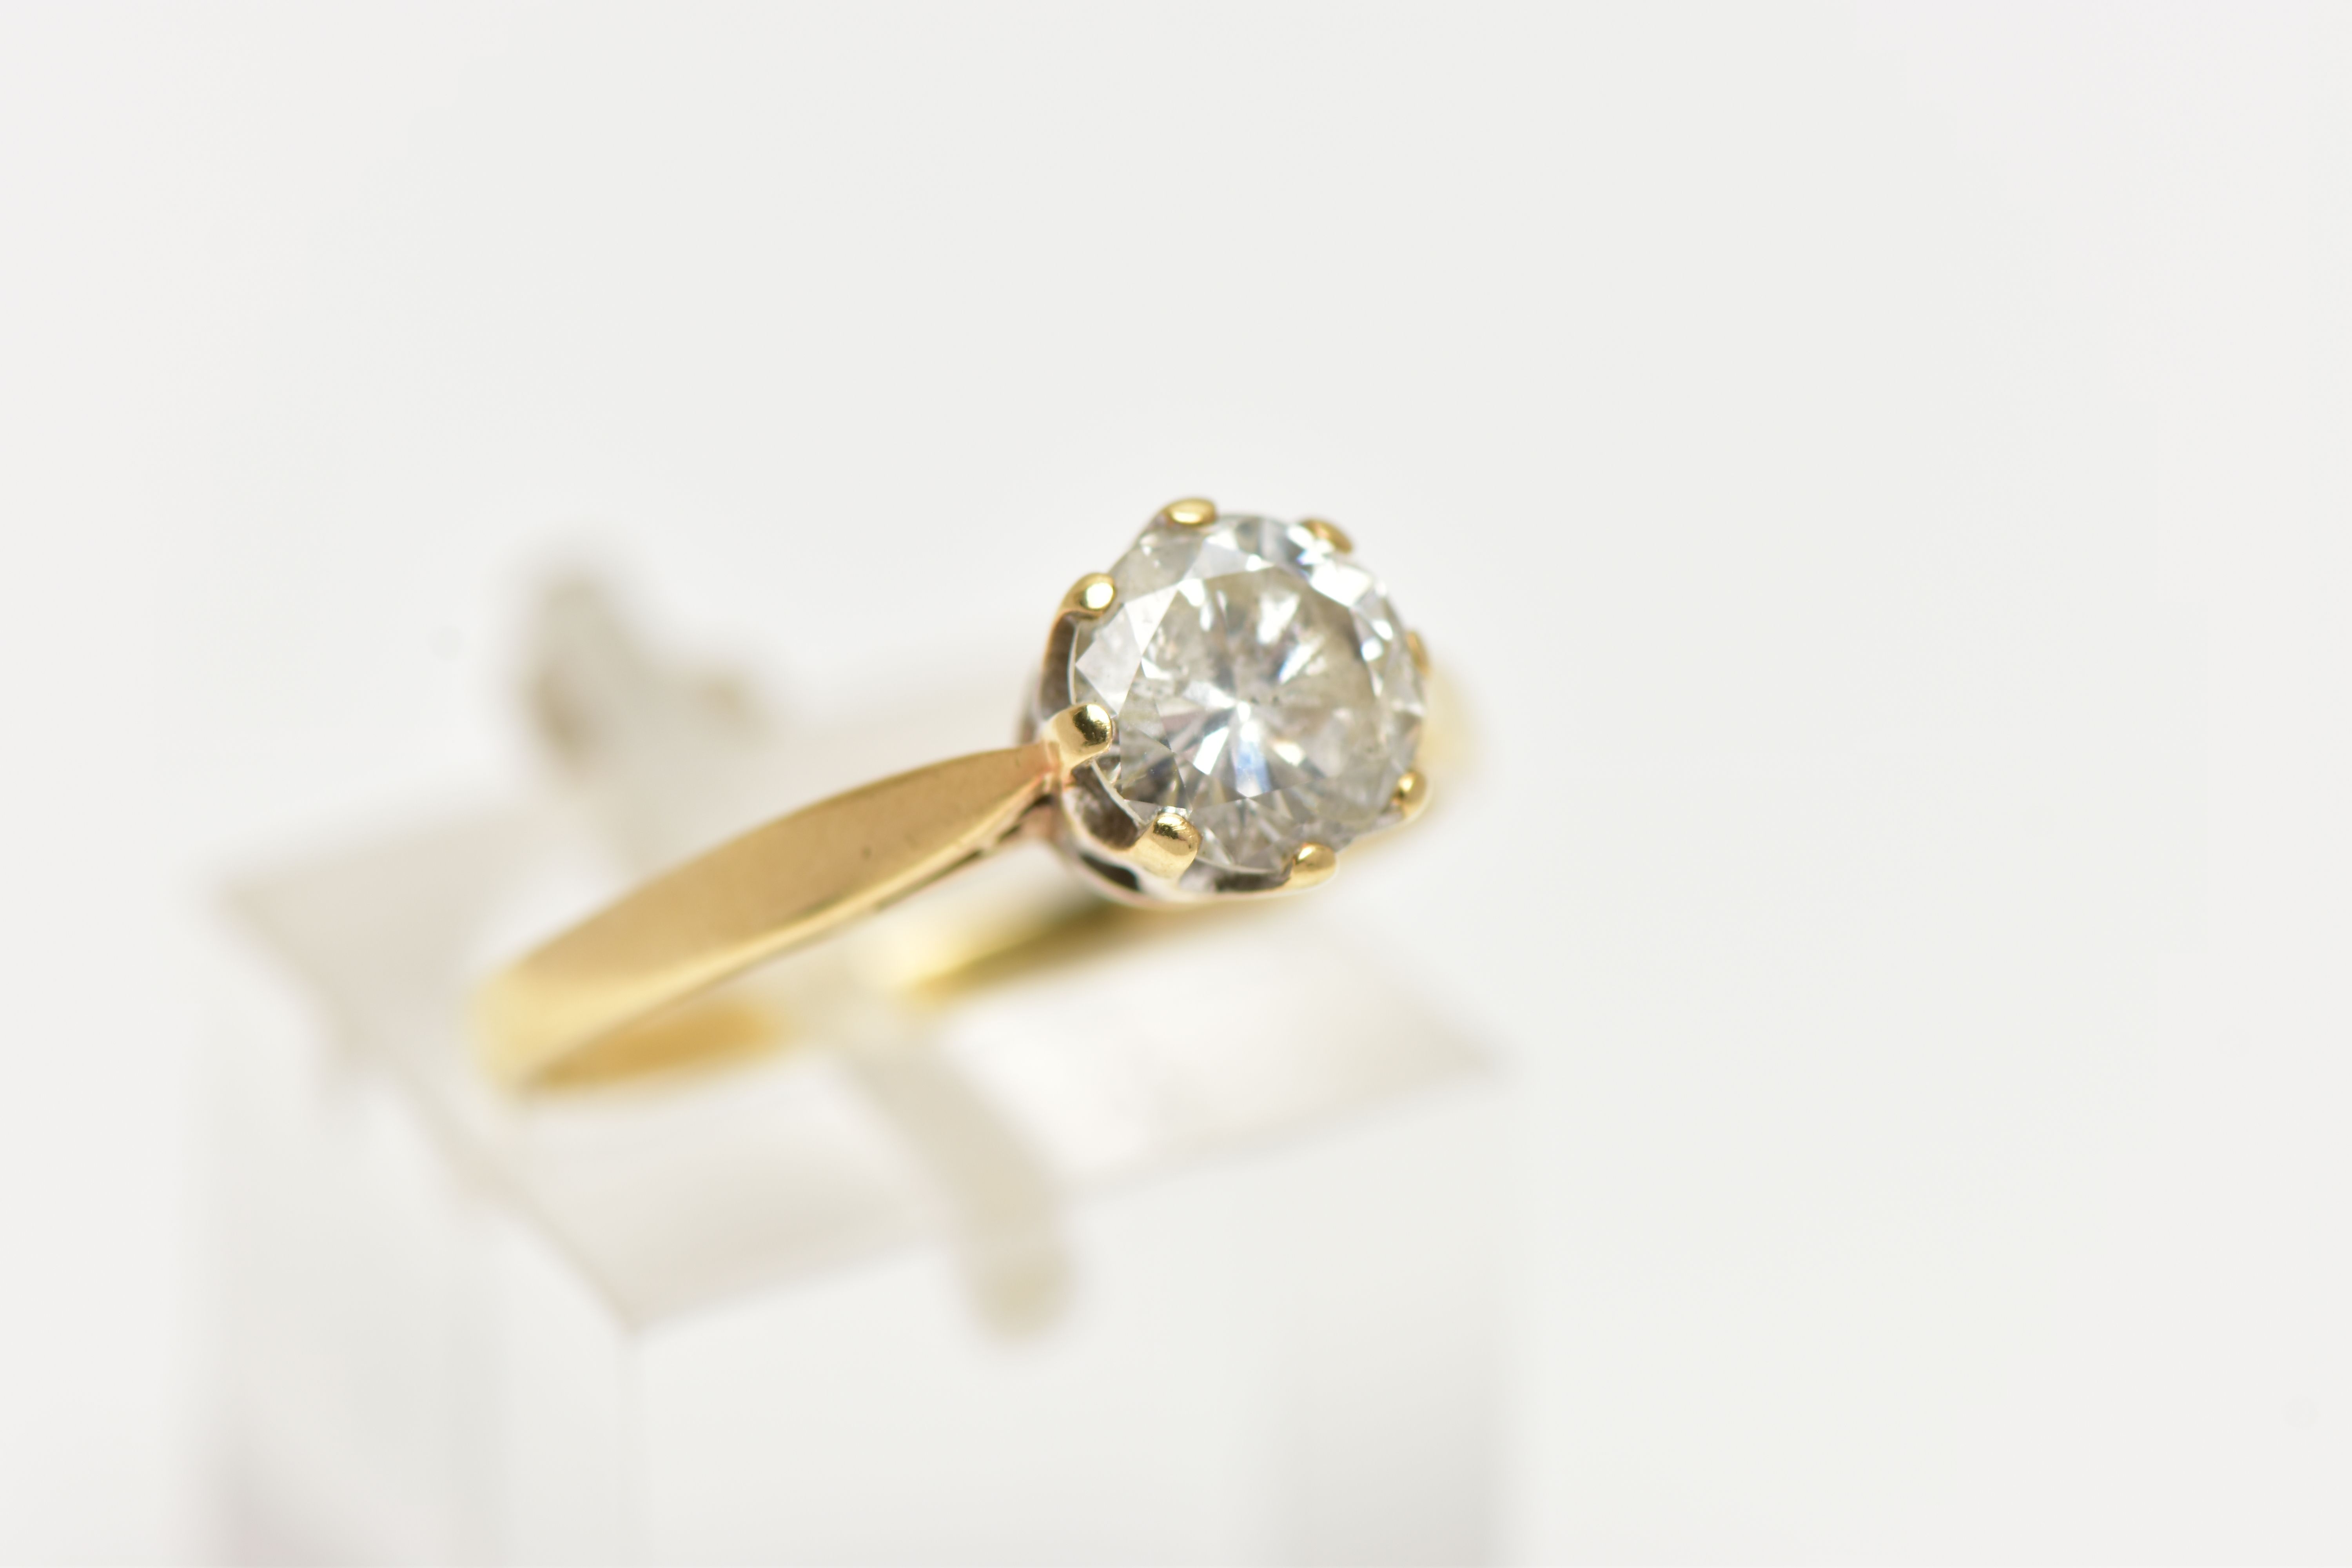 AN 18CT YELLOW GOLD, SINGLE STONE DIAMOND RING, round brilliant cut diamond in an eight claw - Image 4 of 7